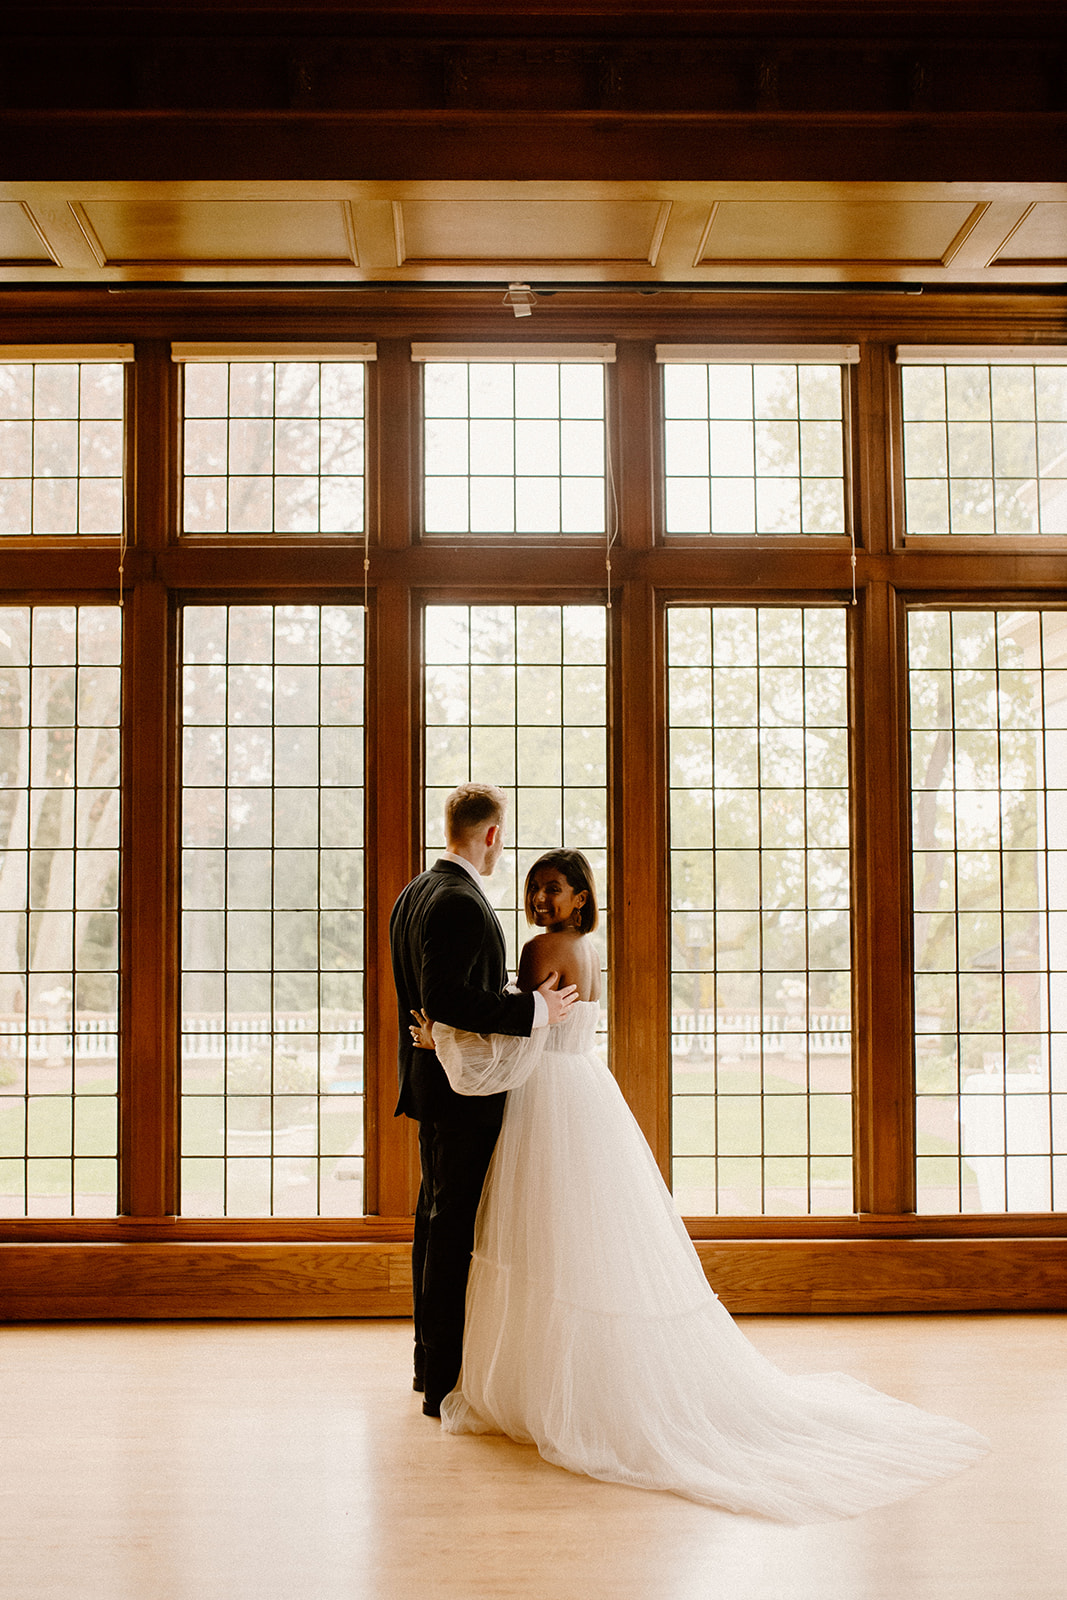 A Fun Intimate Wedding Day at Lairmont Manor With Elegant Wedding Decor